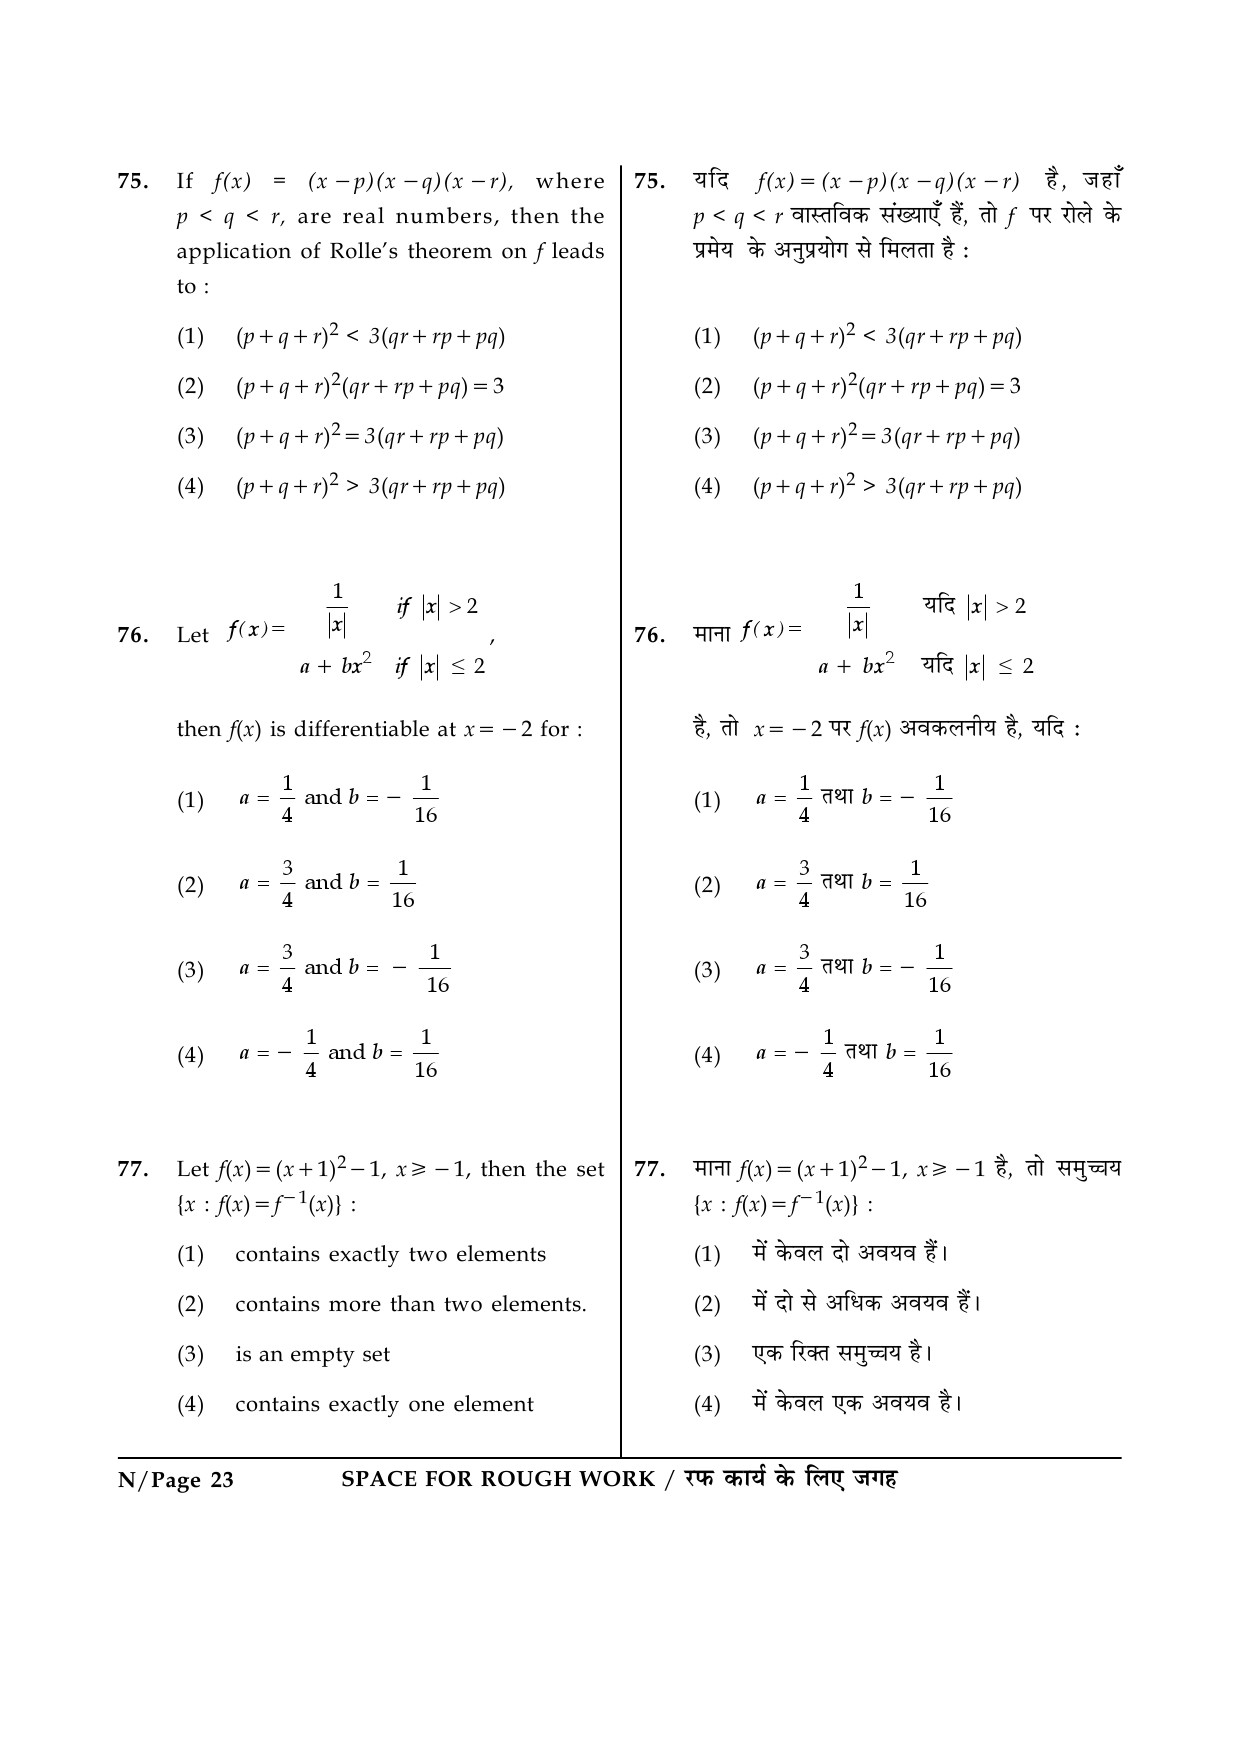 JEE Main Exam Question Paper 2015 Booklet N 23